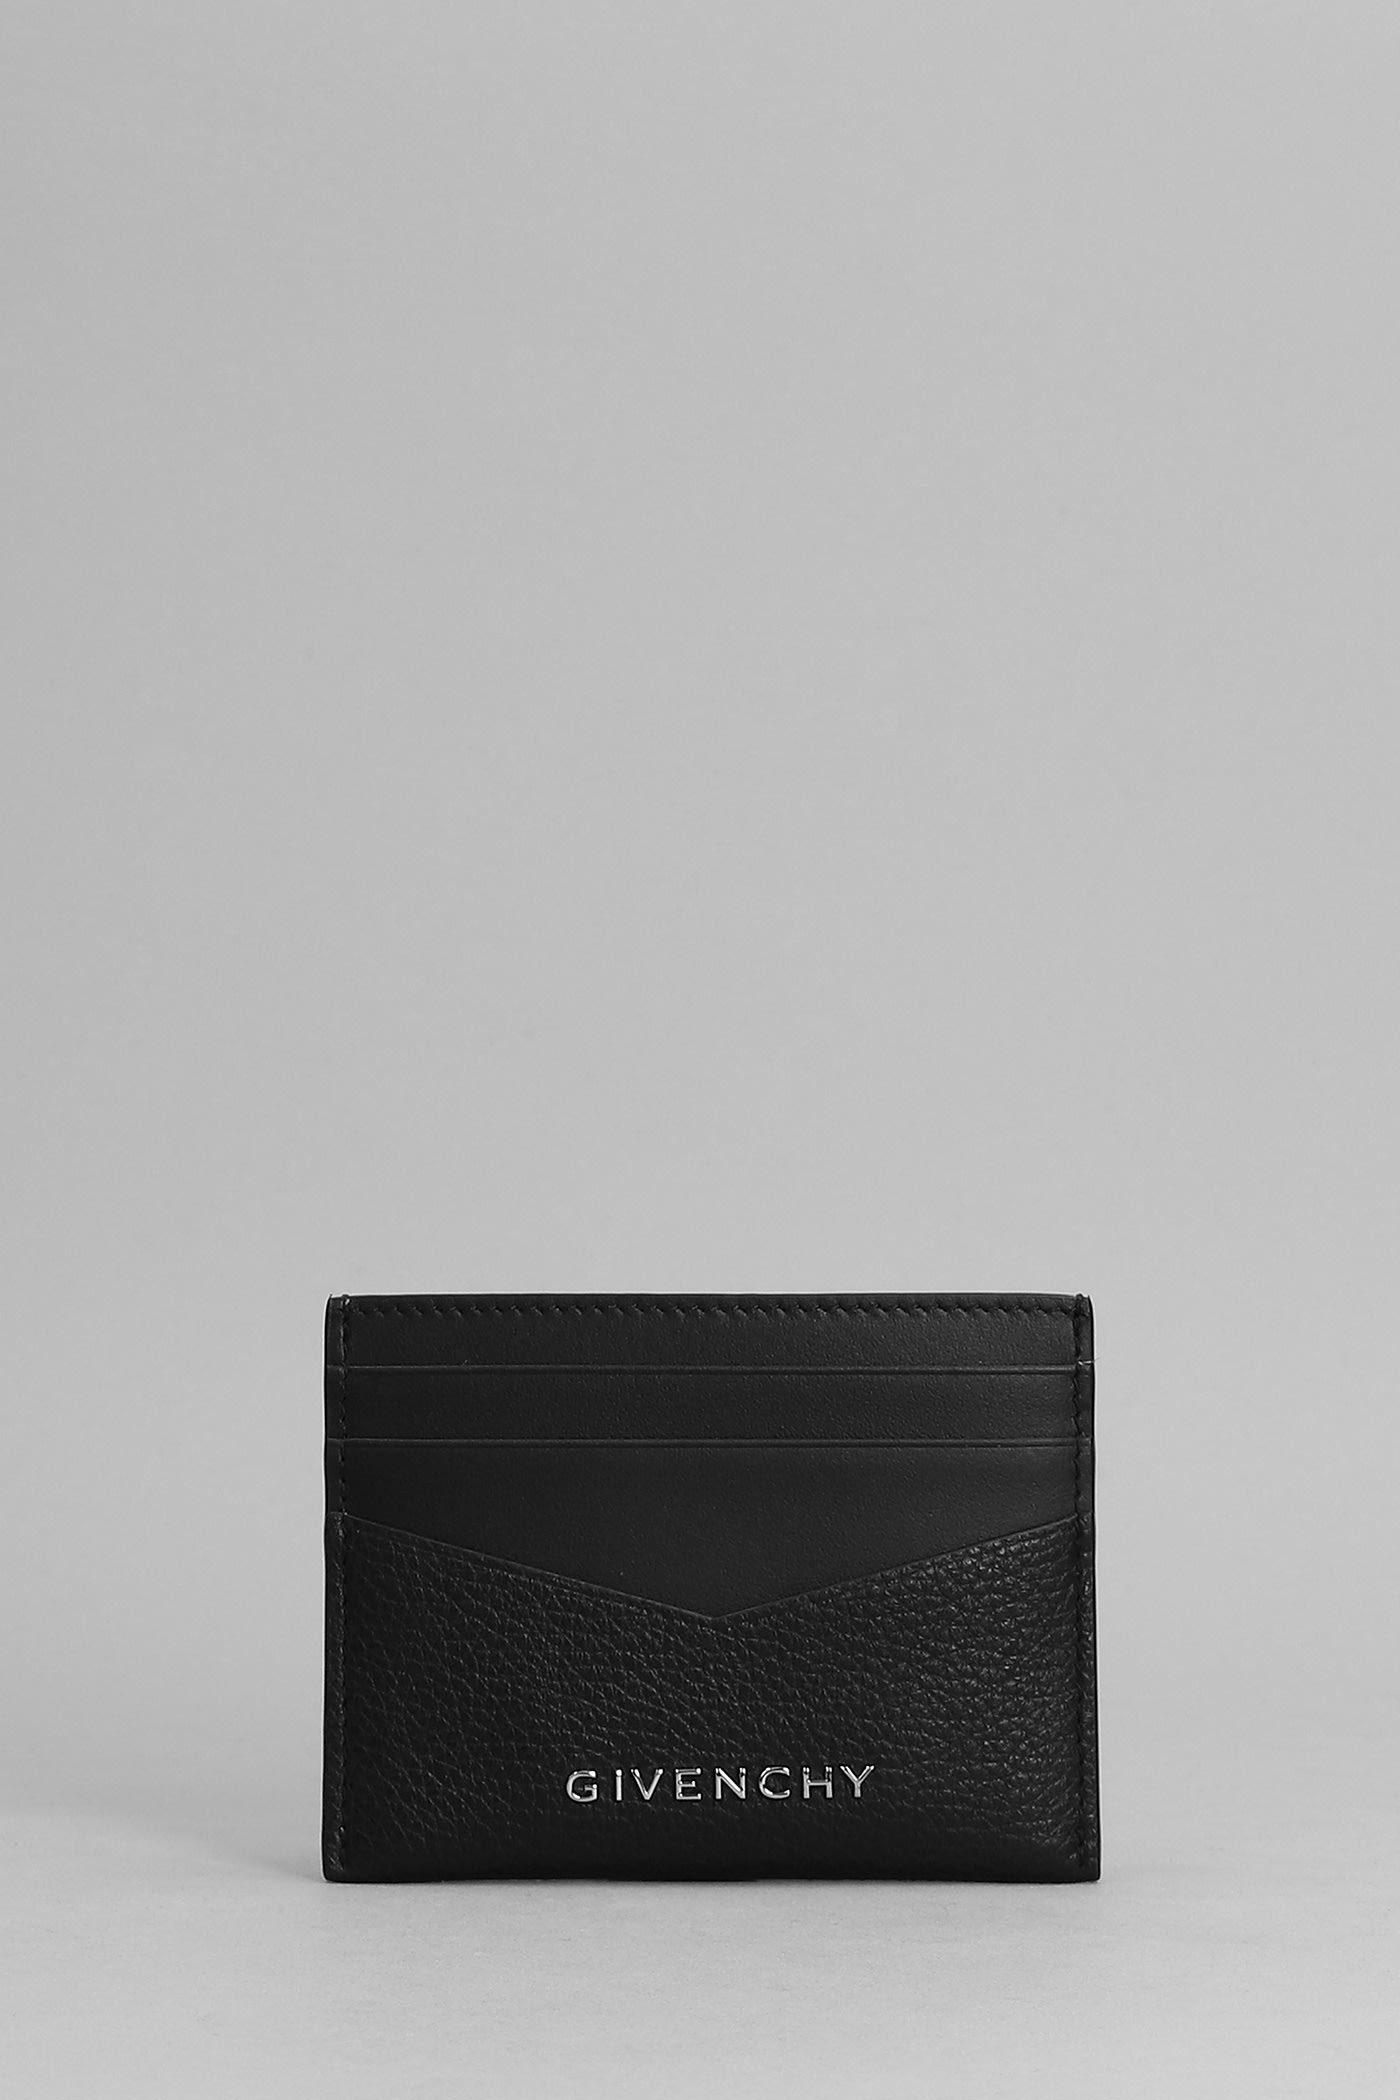 Givenchy Wallet In Black Leather